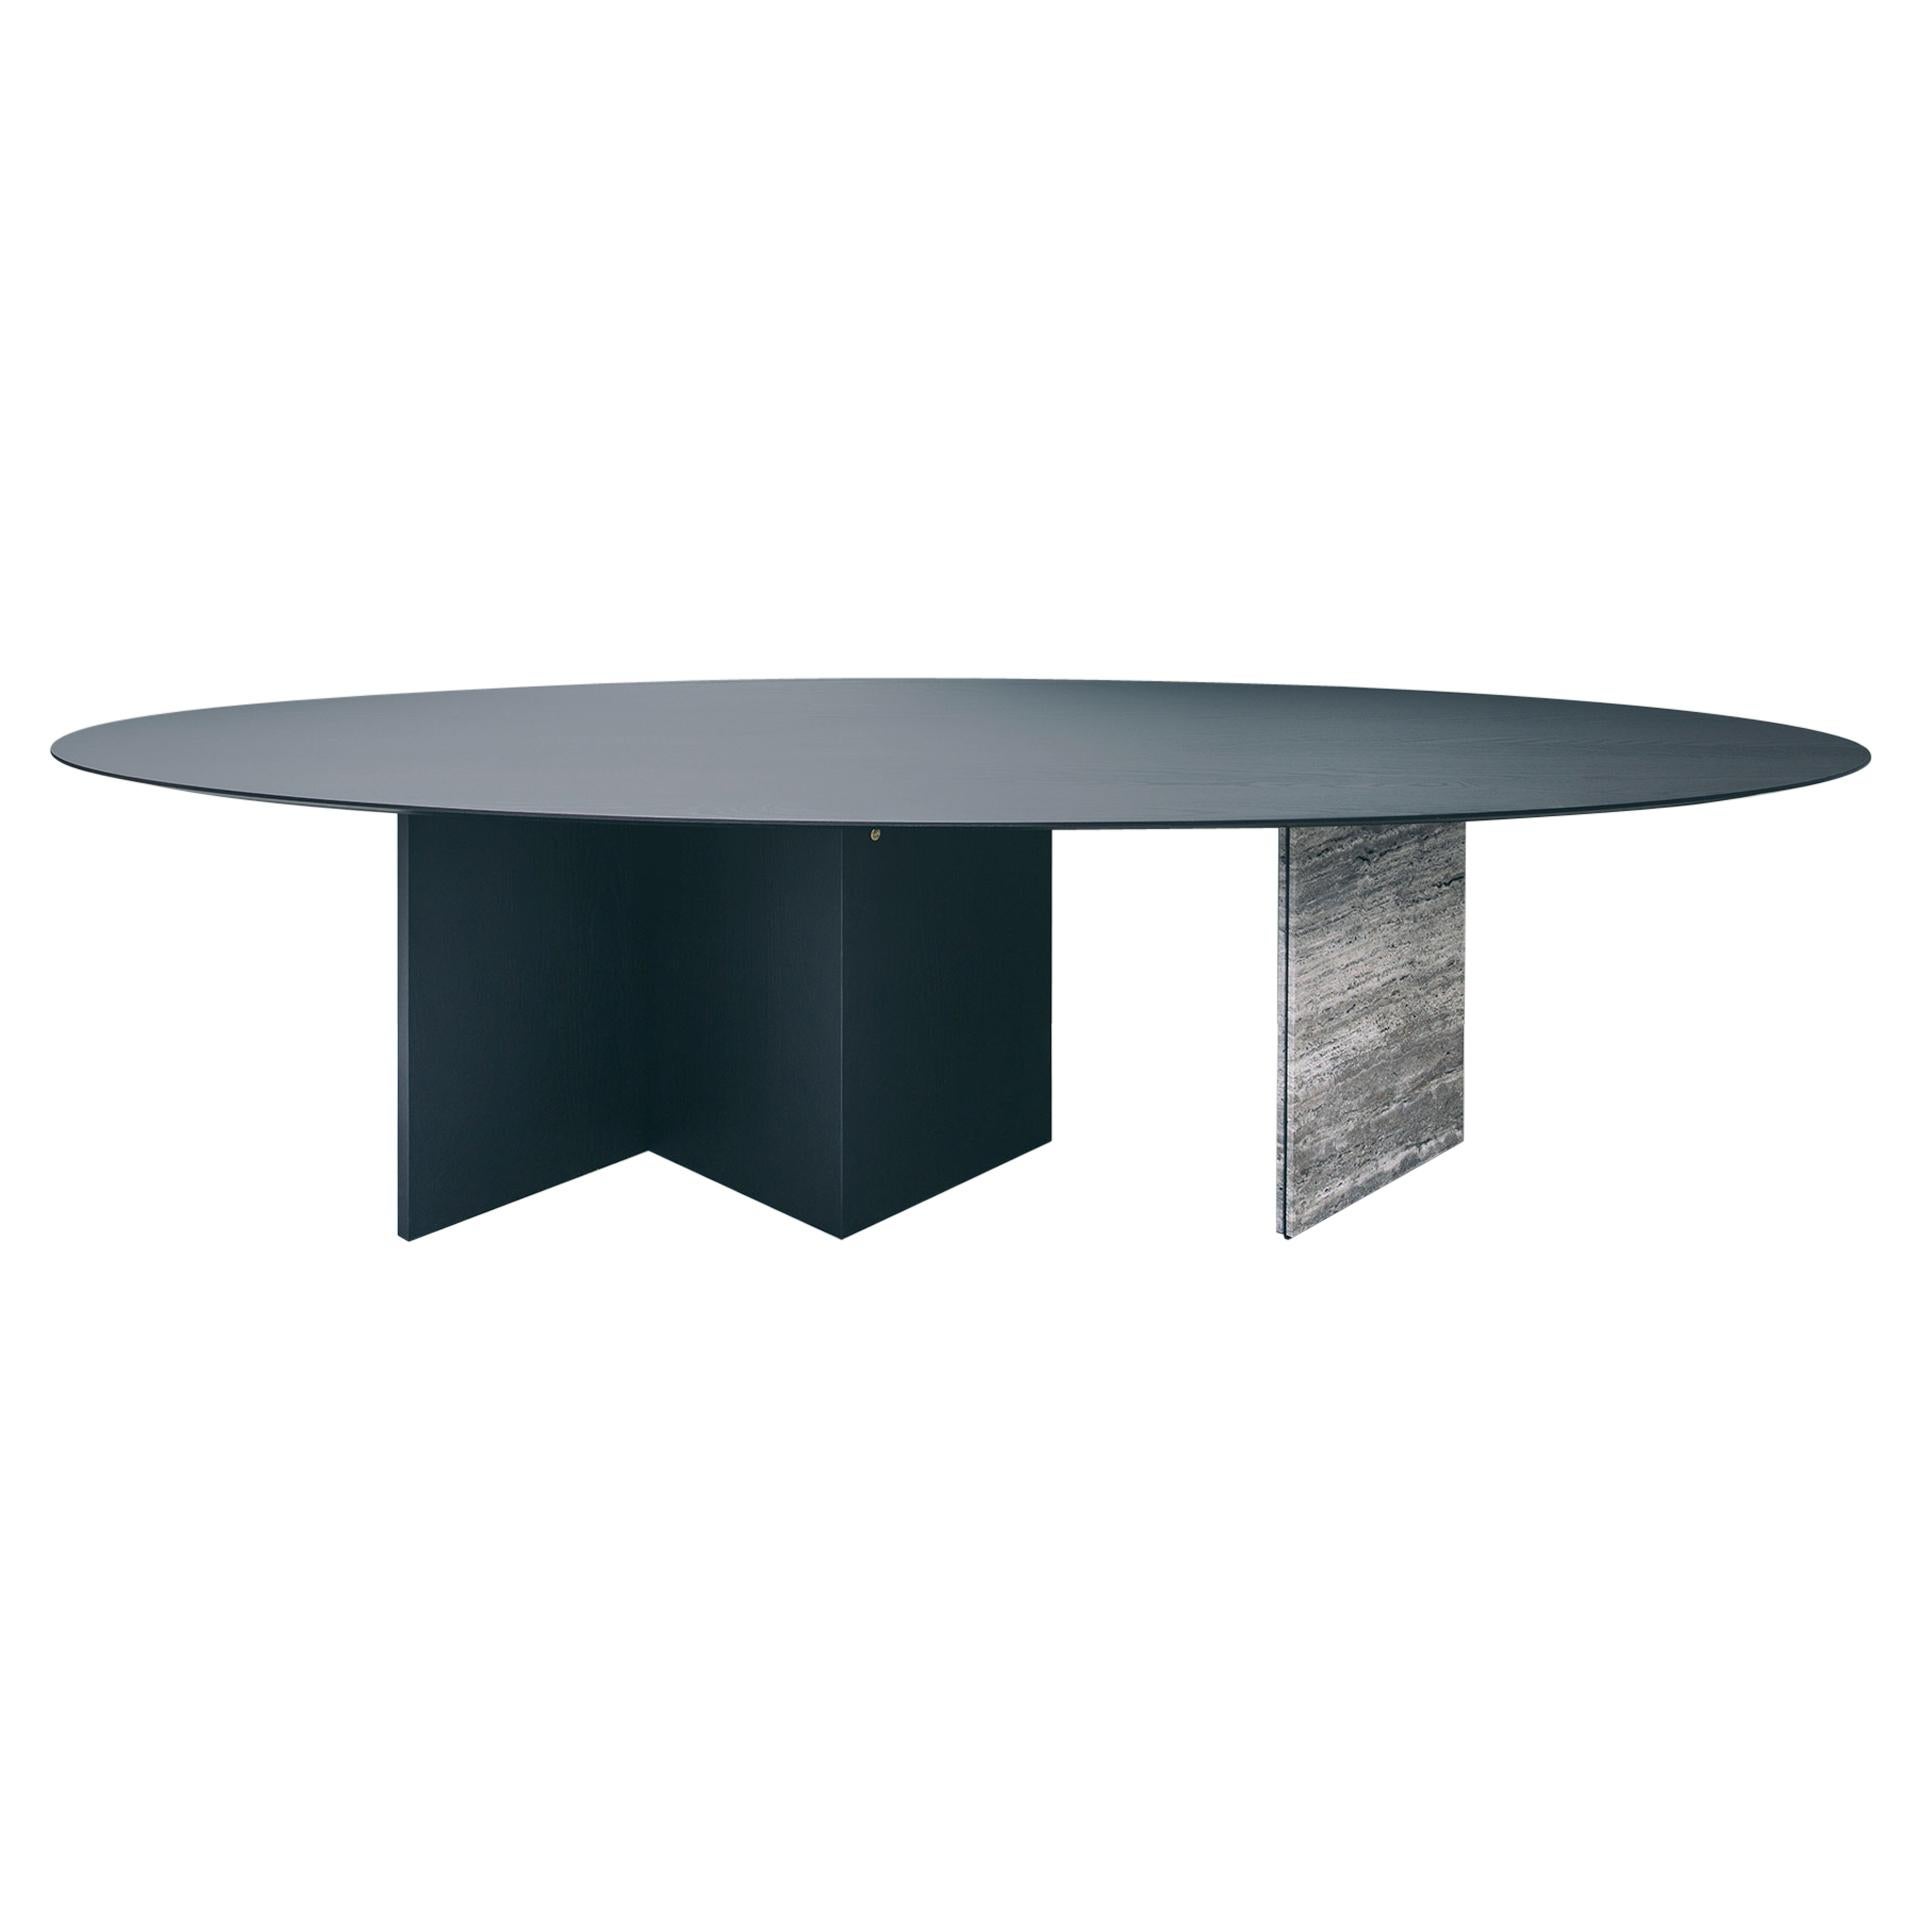 Contemporary oval ellipse dining table, black ash wood & travertine, Belgium For Sale